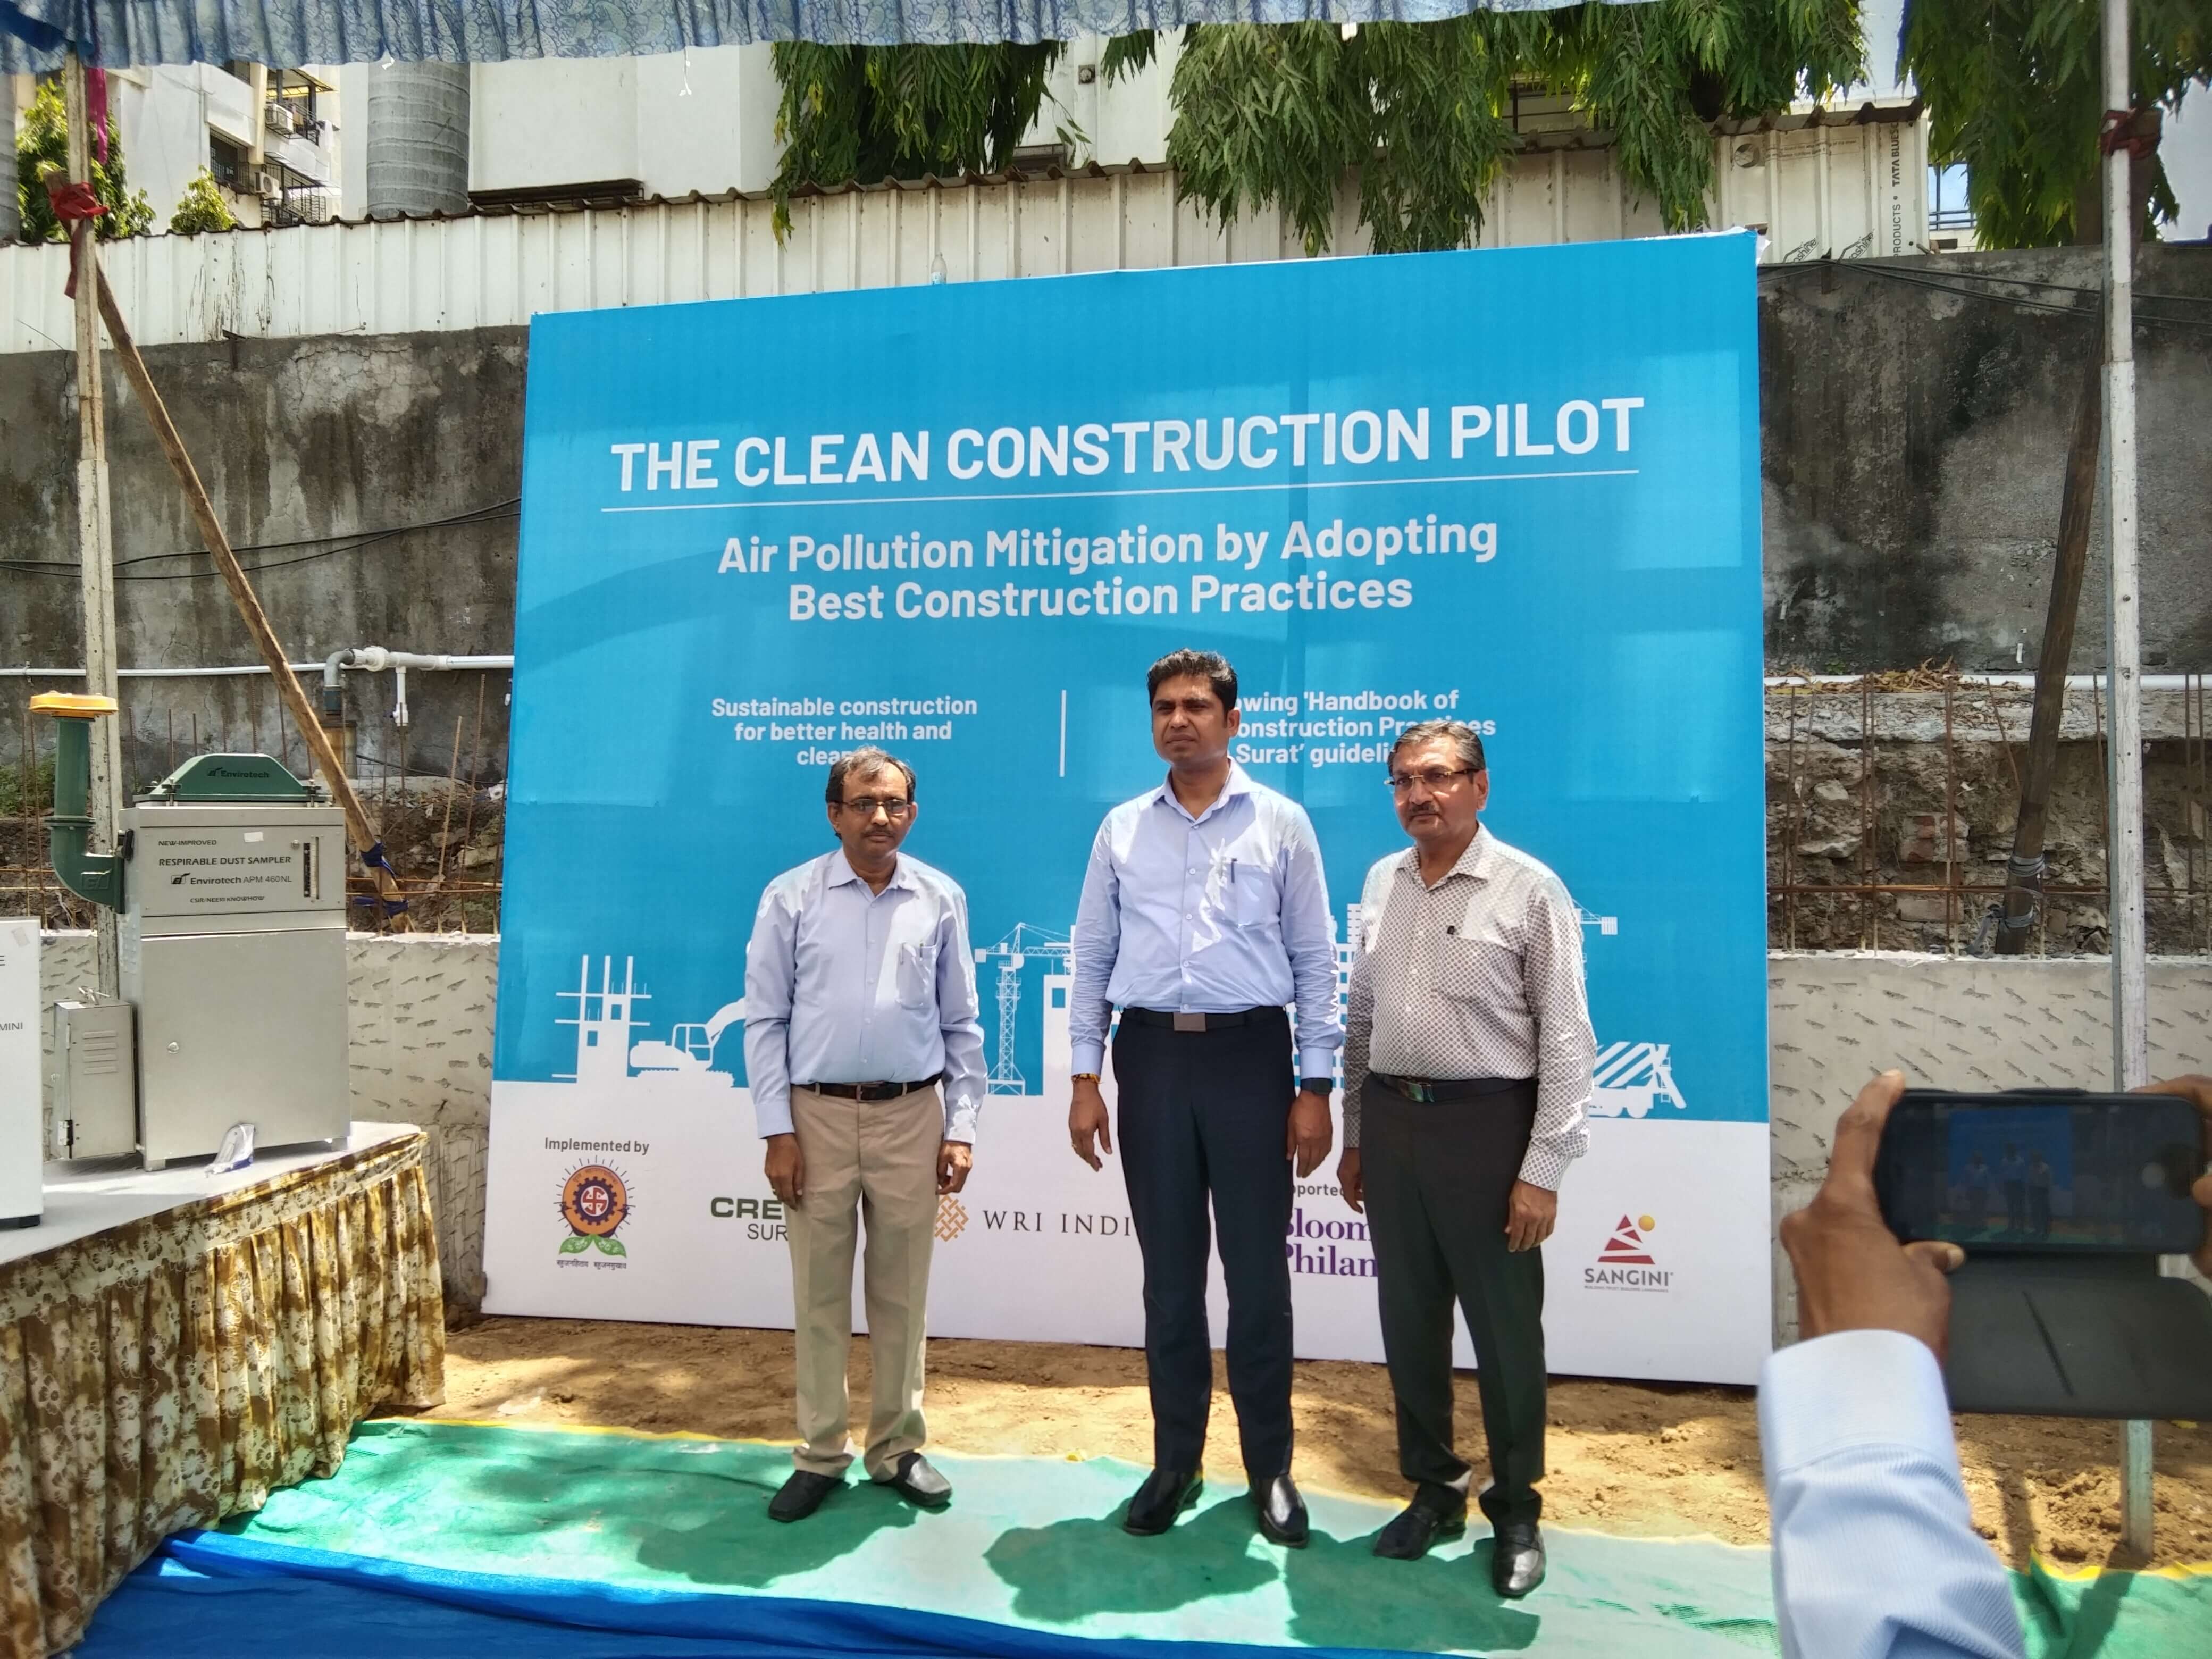 Launch of the Clean Construction Pilot Project in Surat